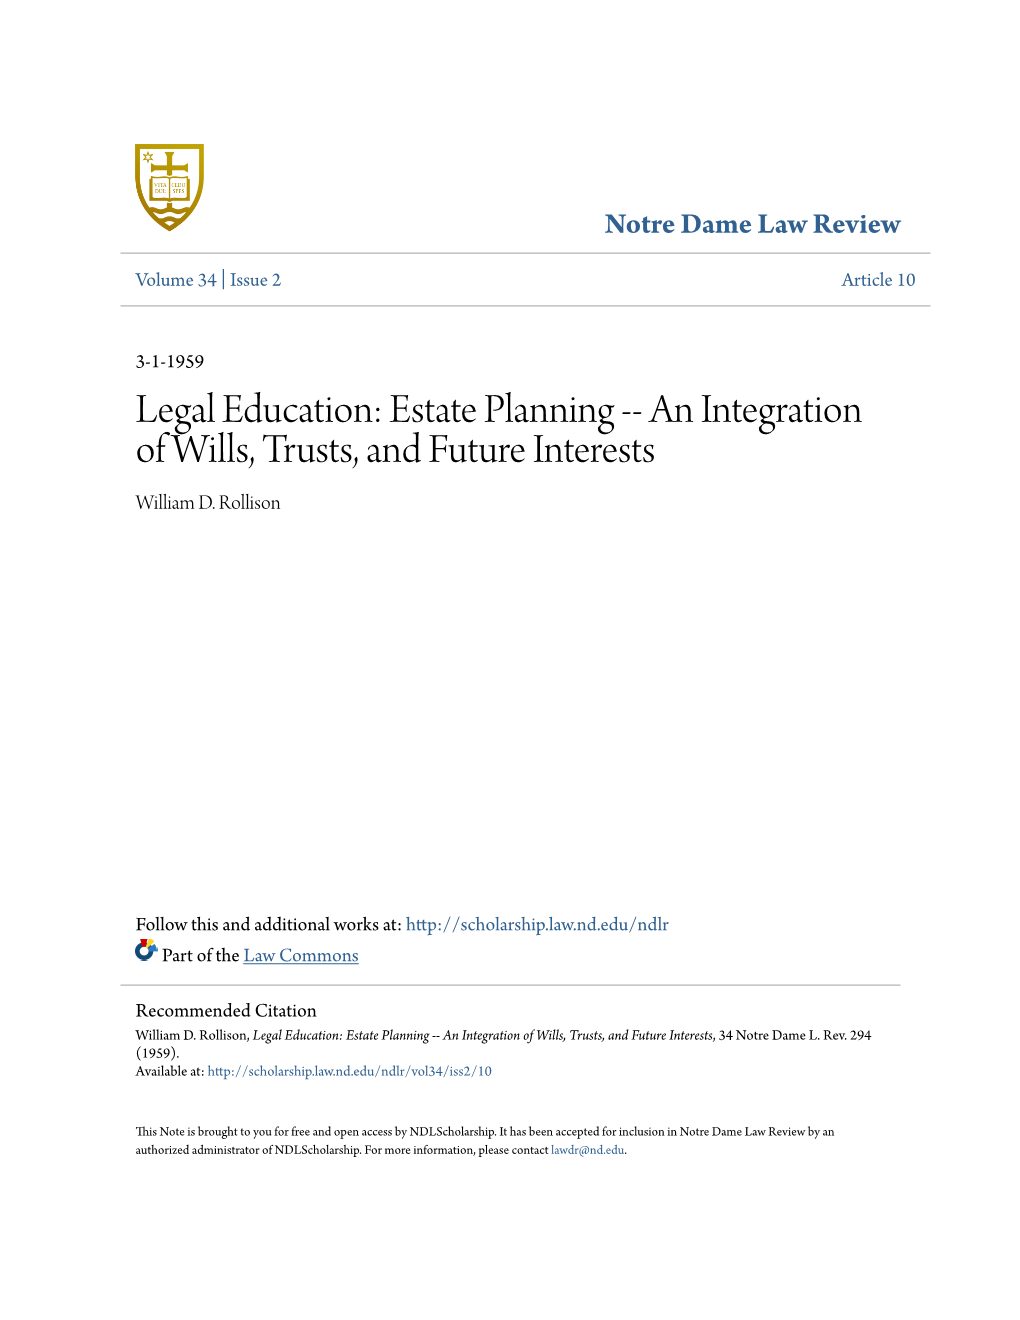 Estate Planning -- an Integration of Wills, Trusts, and Future Interests William D